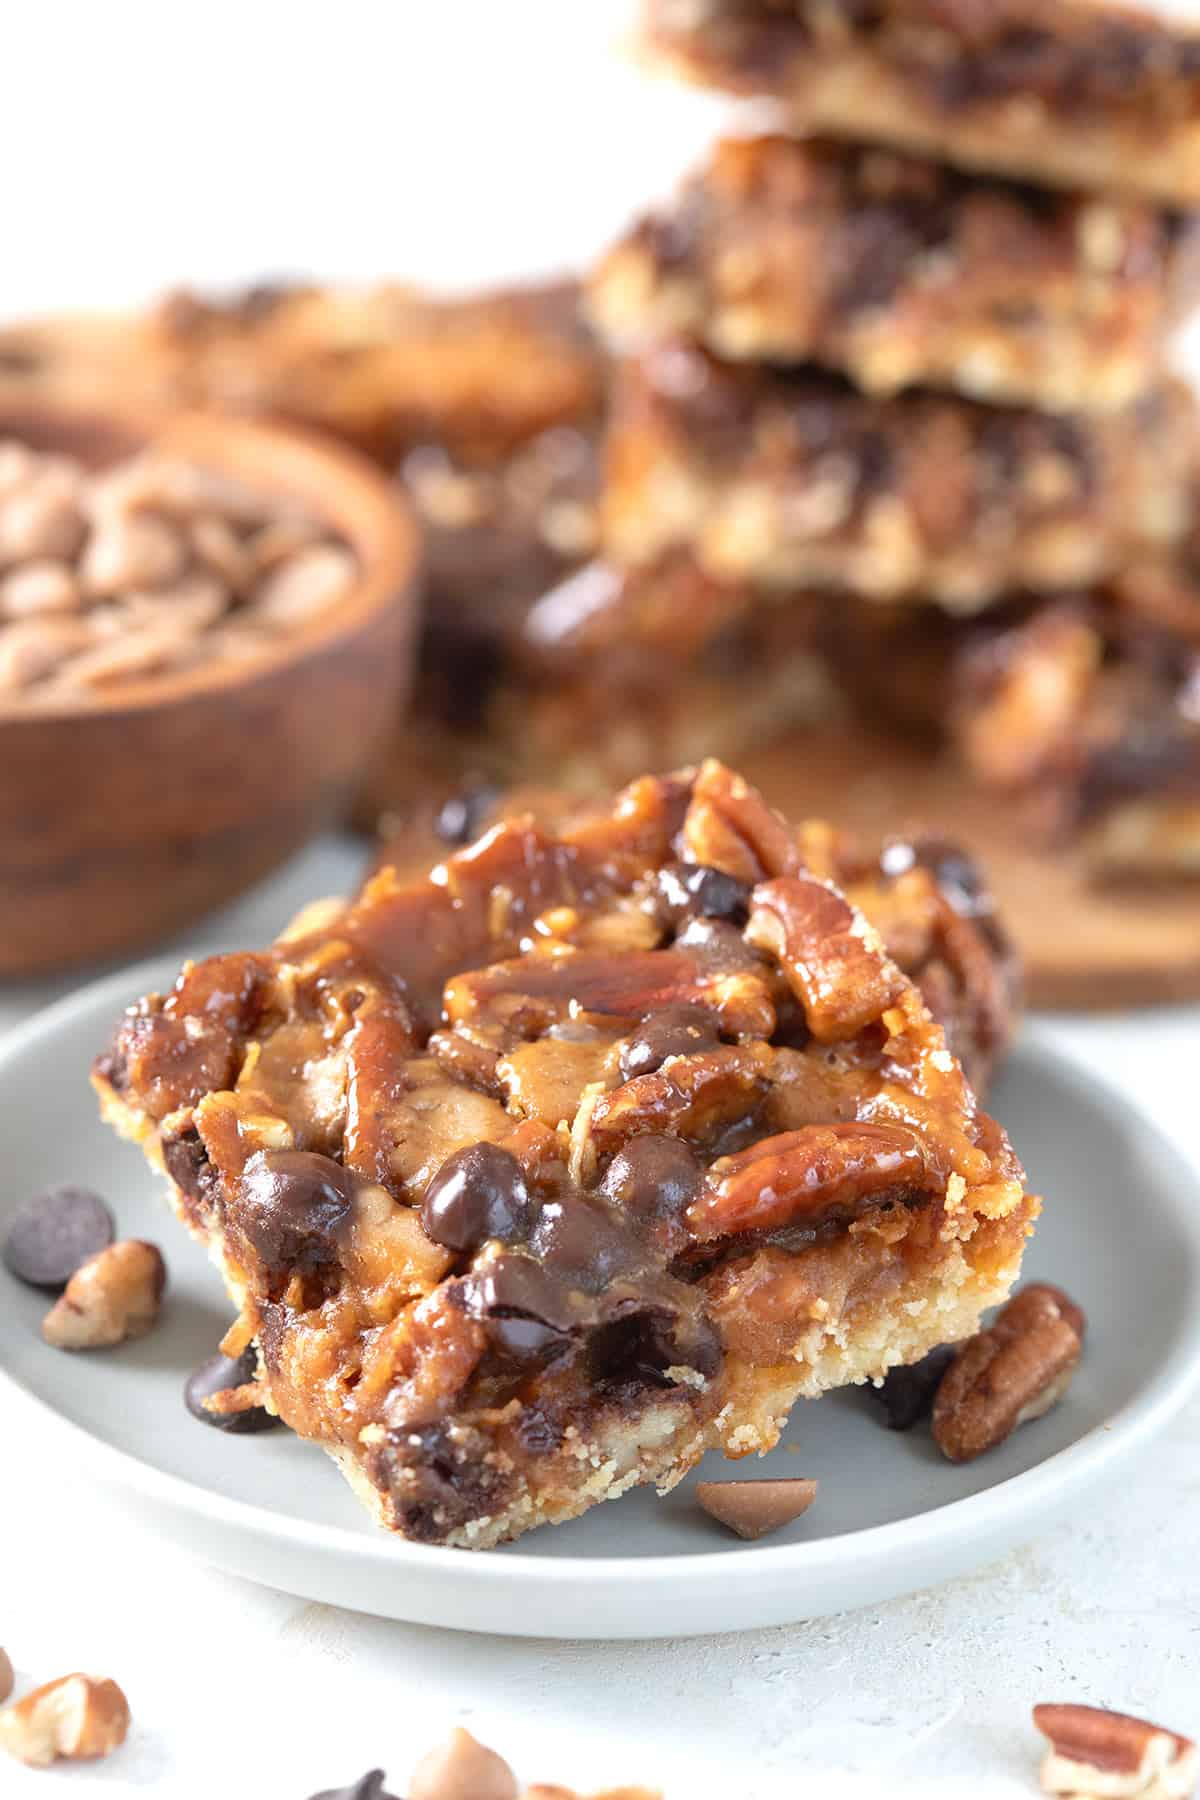 A salted caramel magic bar on a gray plate with chocolate chips and nuts strewn around.